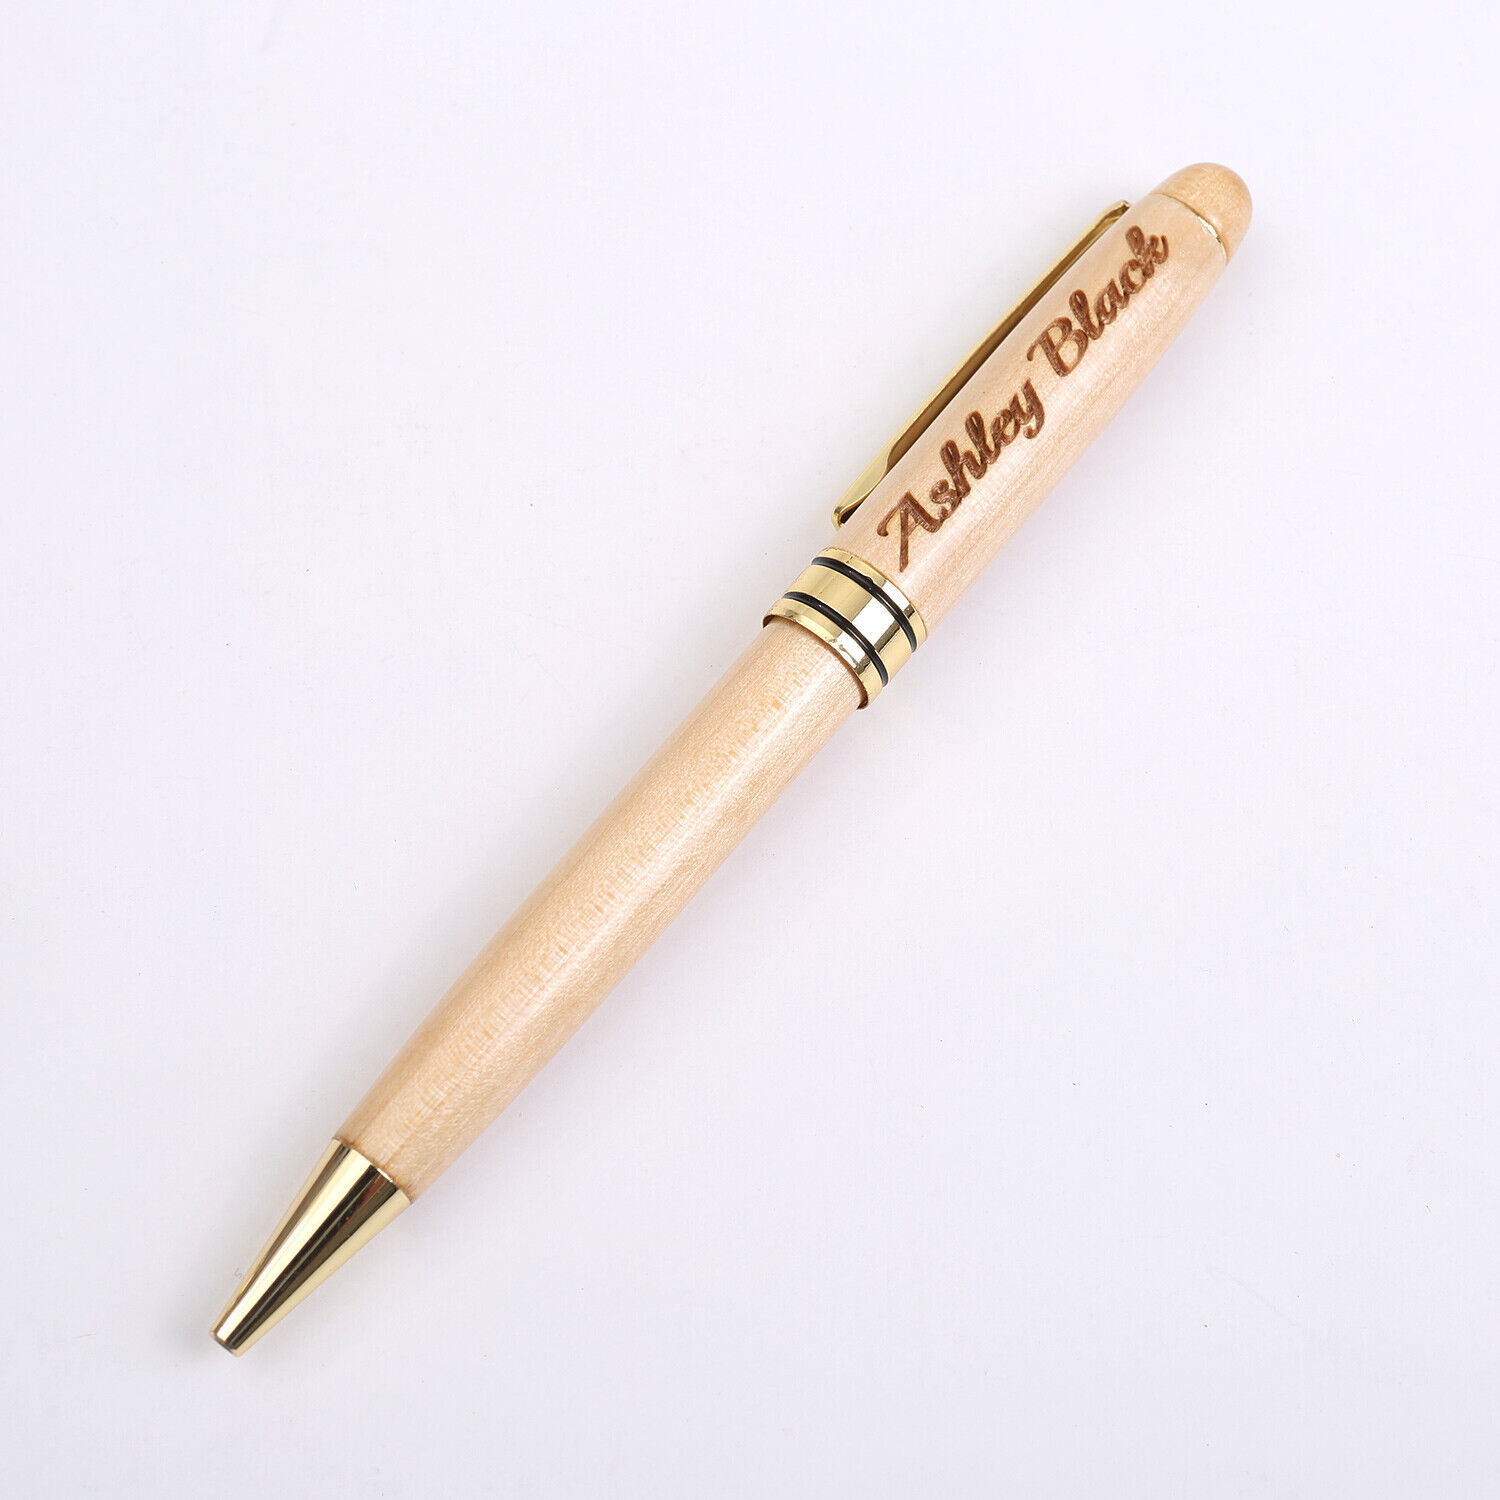 Personalized Maple Wood Ballpoint Pens Name pens.  Custom Name Business pens